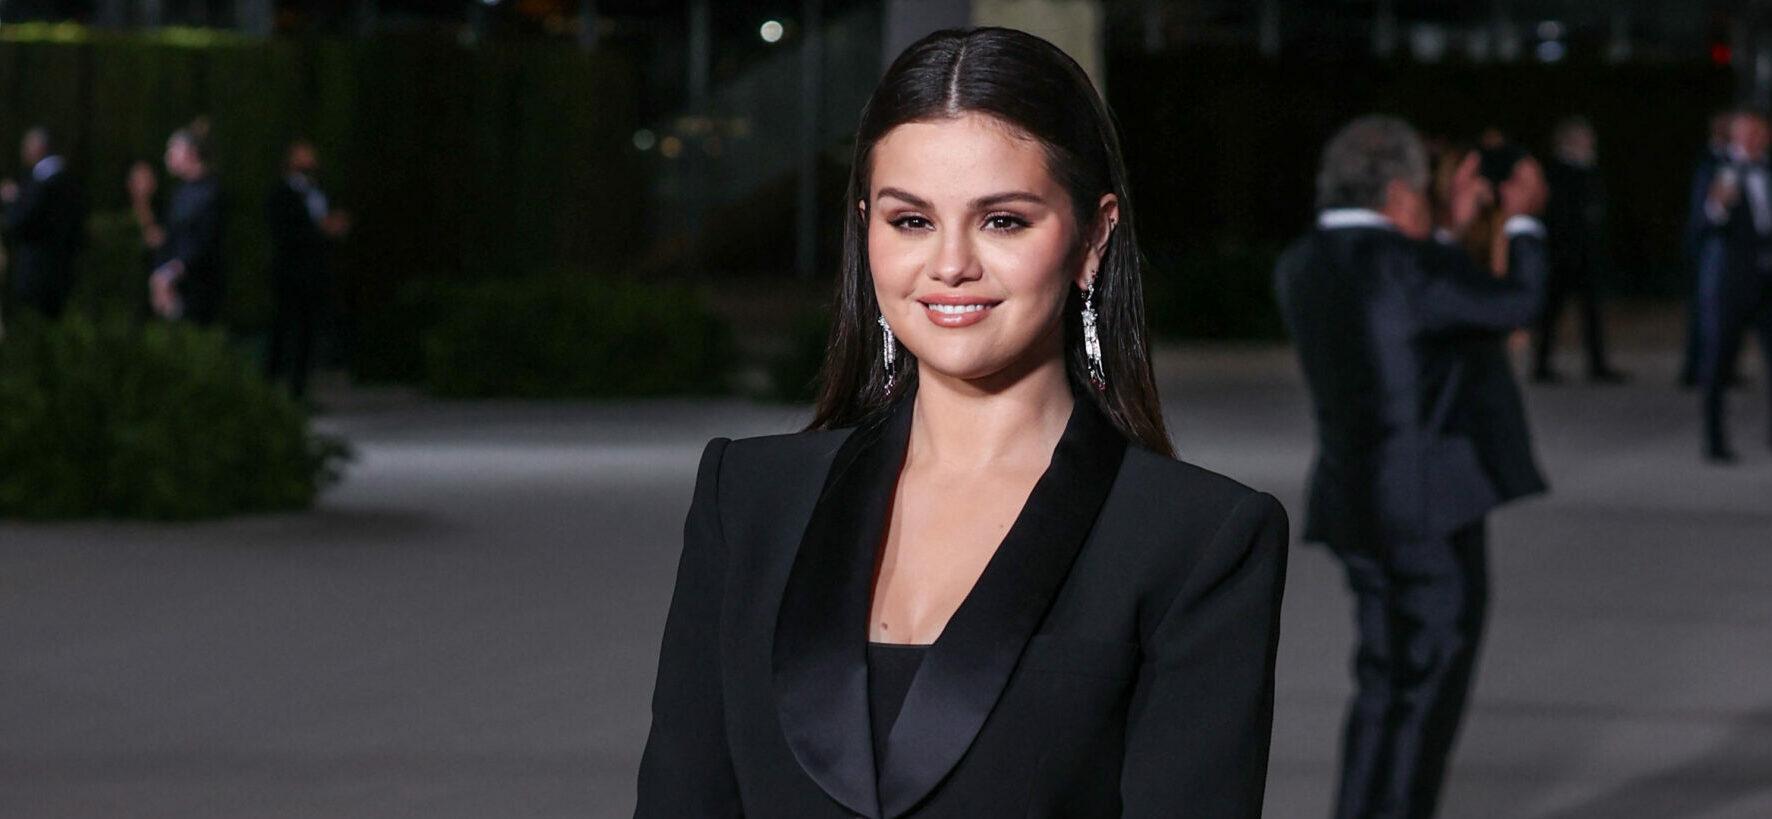 Selena Gomez at the 2nd Annual Academy Museum Of Motion Pictures Gala